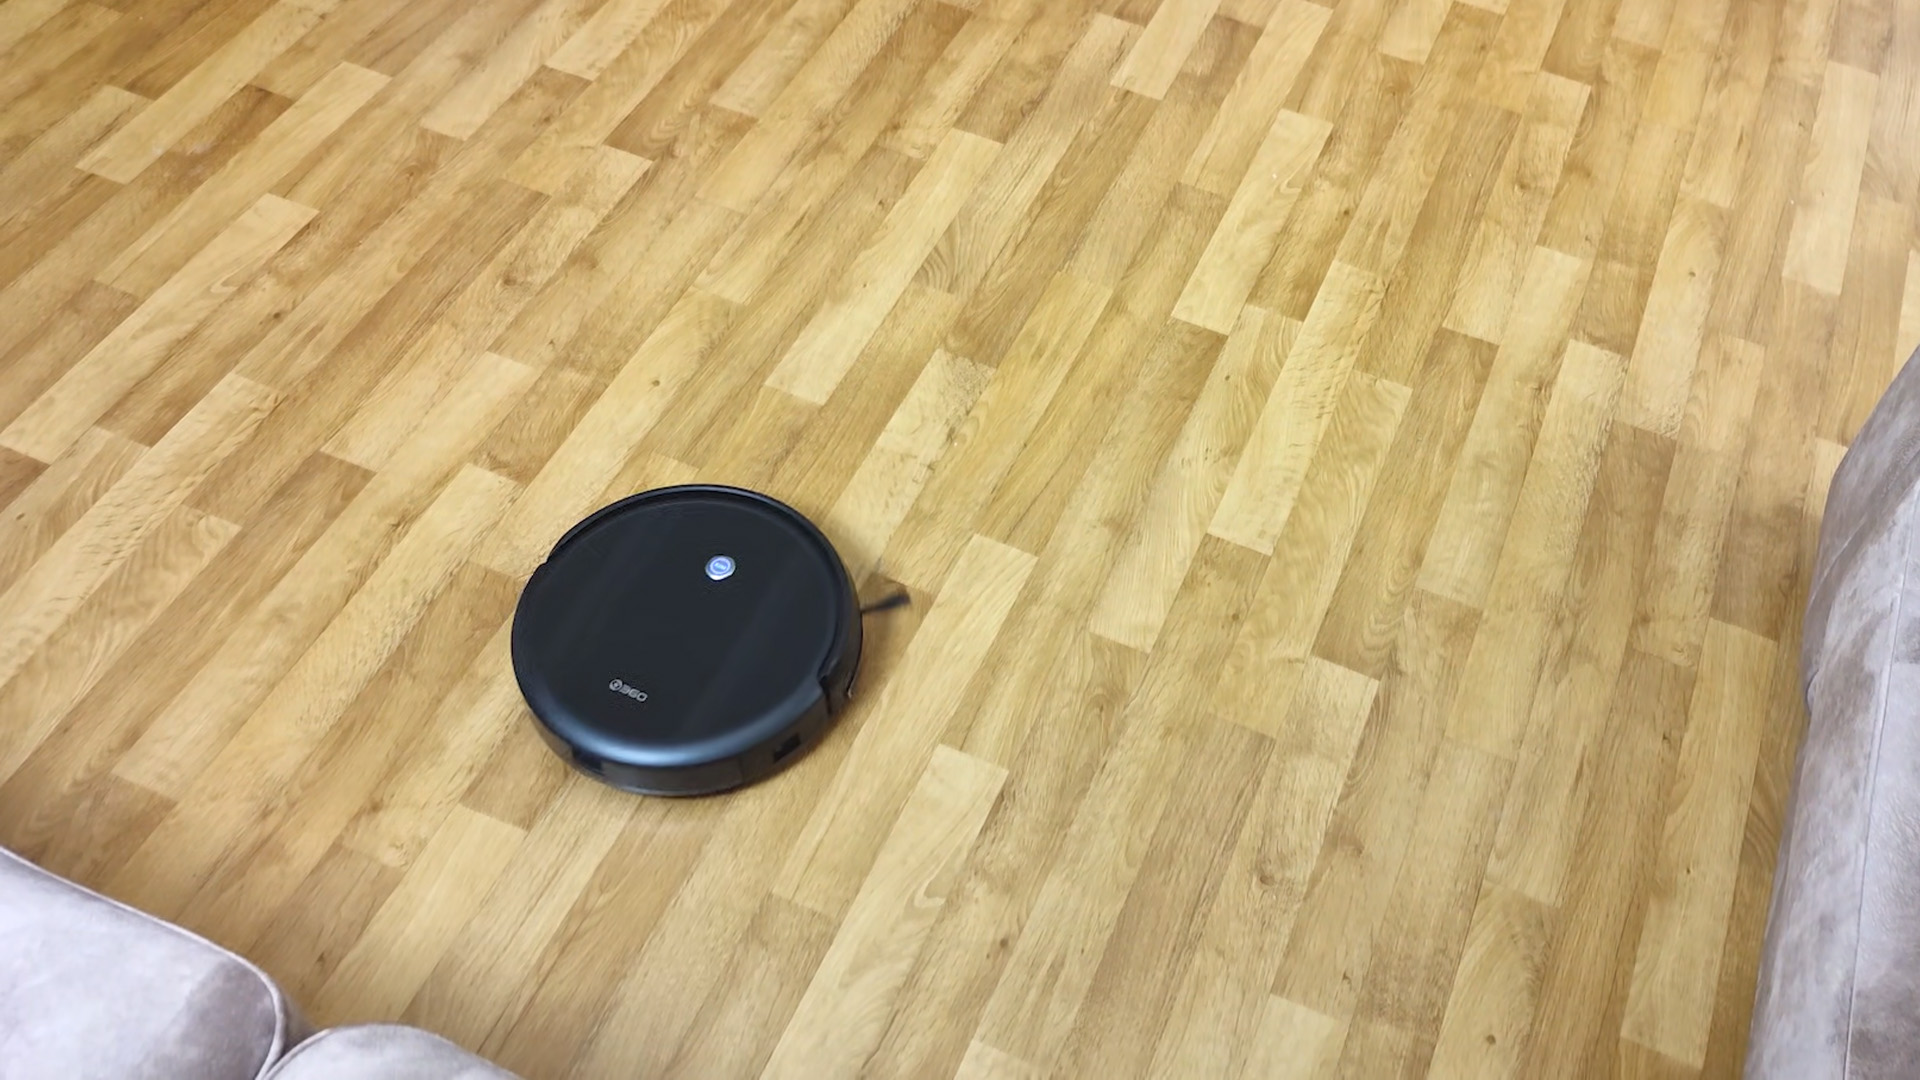 Overview of Robot Vacuum Cleaner 360 C50-1 cleaning